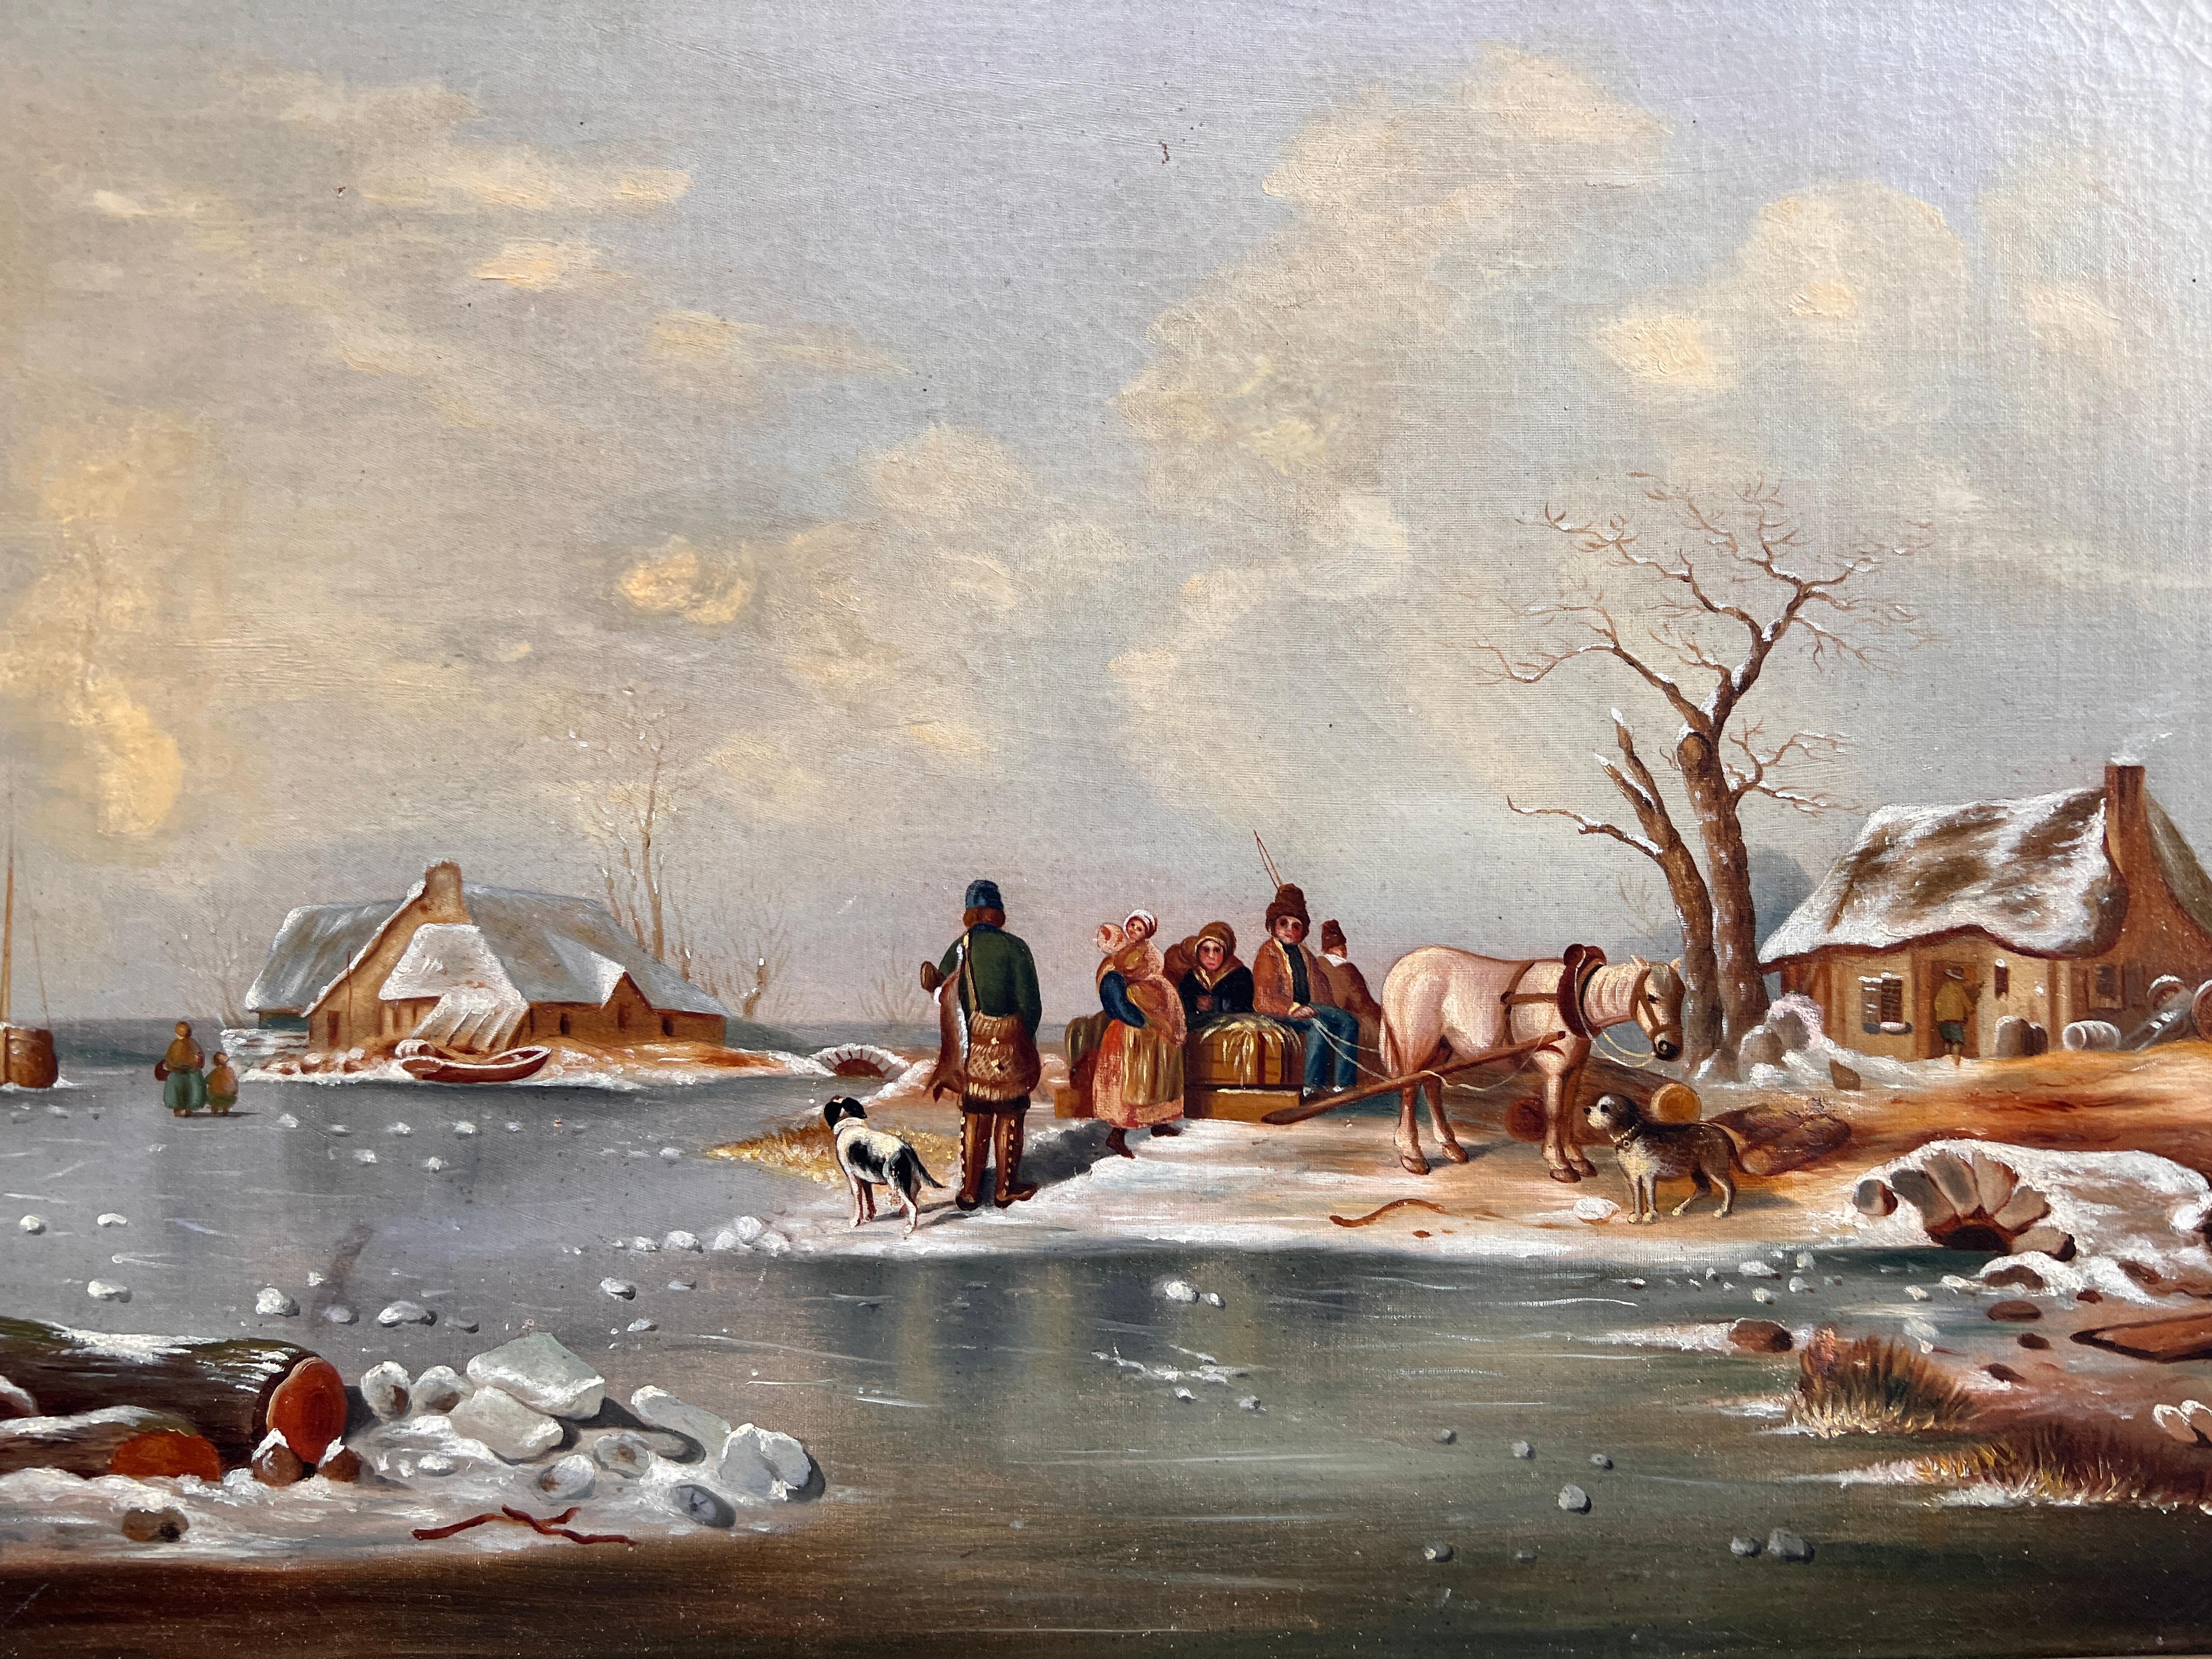 Antique oil painting on canvas, Winter Landscape, Village, figures. Framed - Painting by Unknown